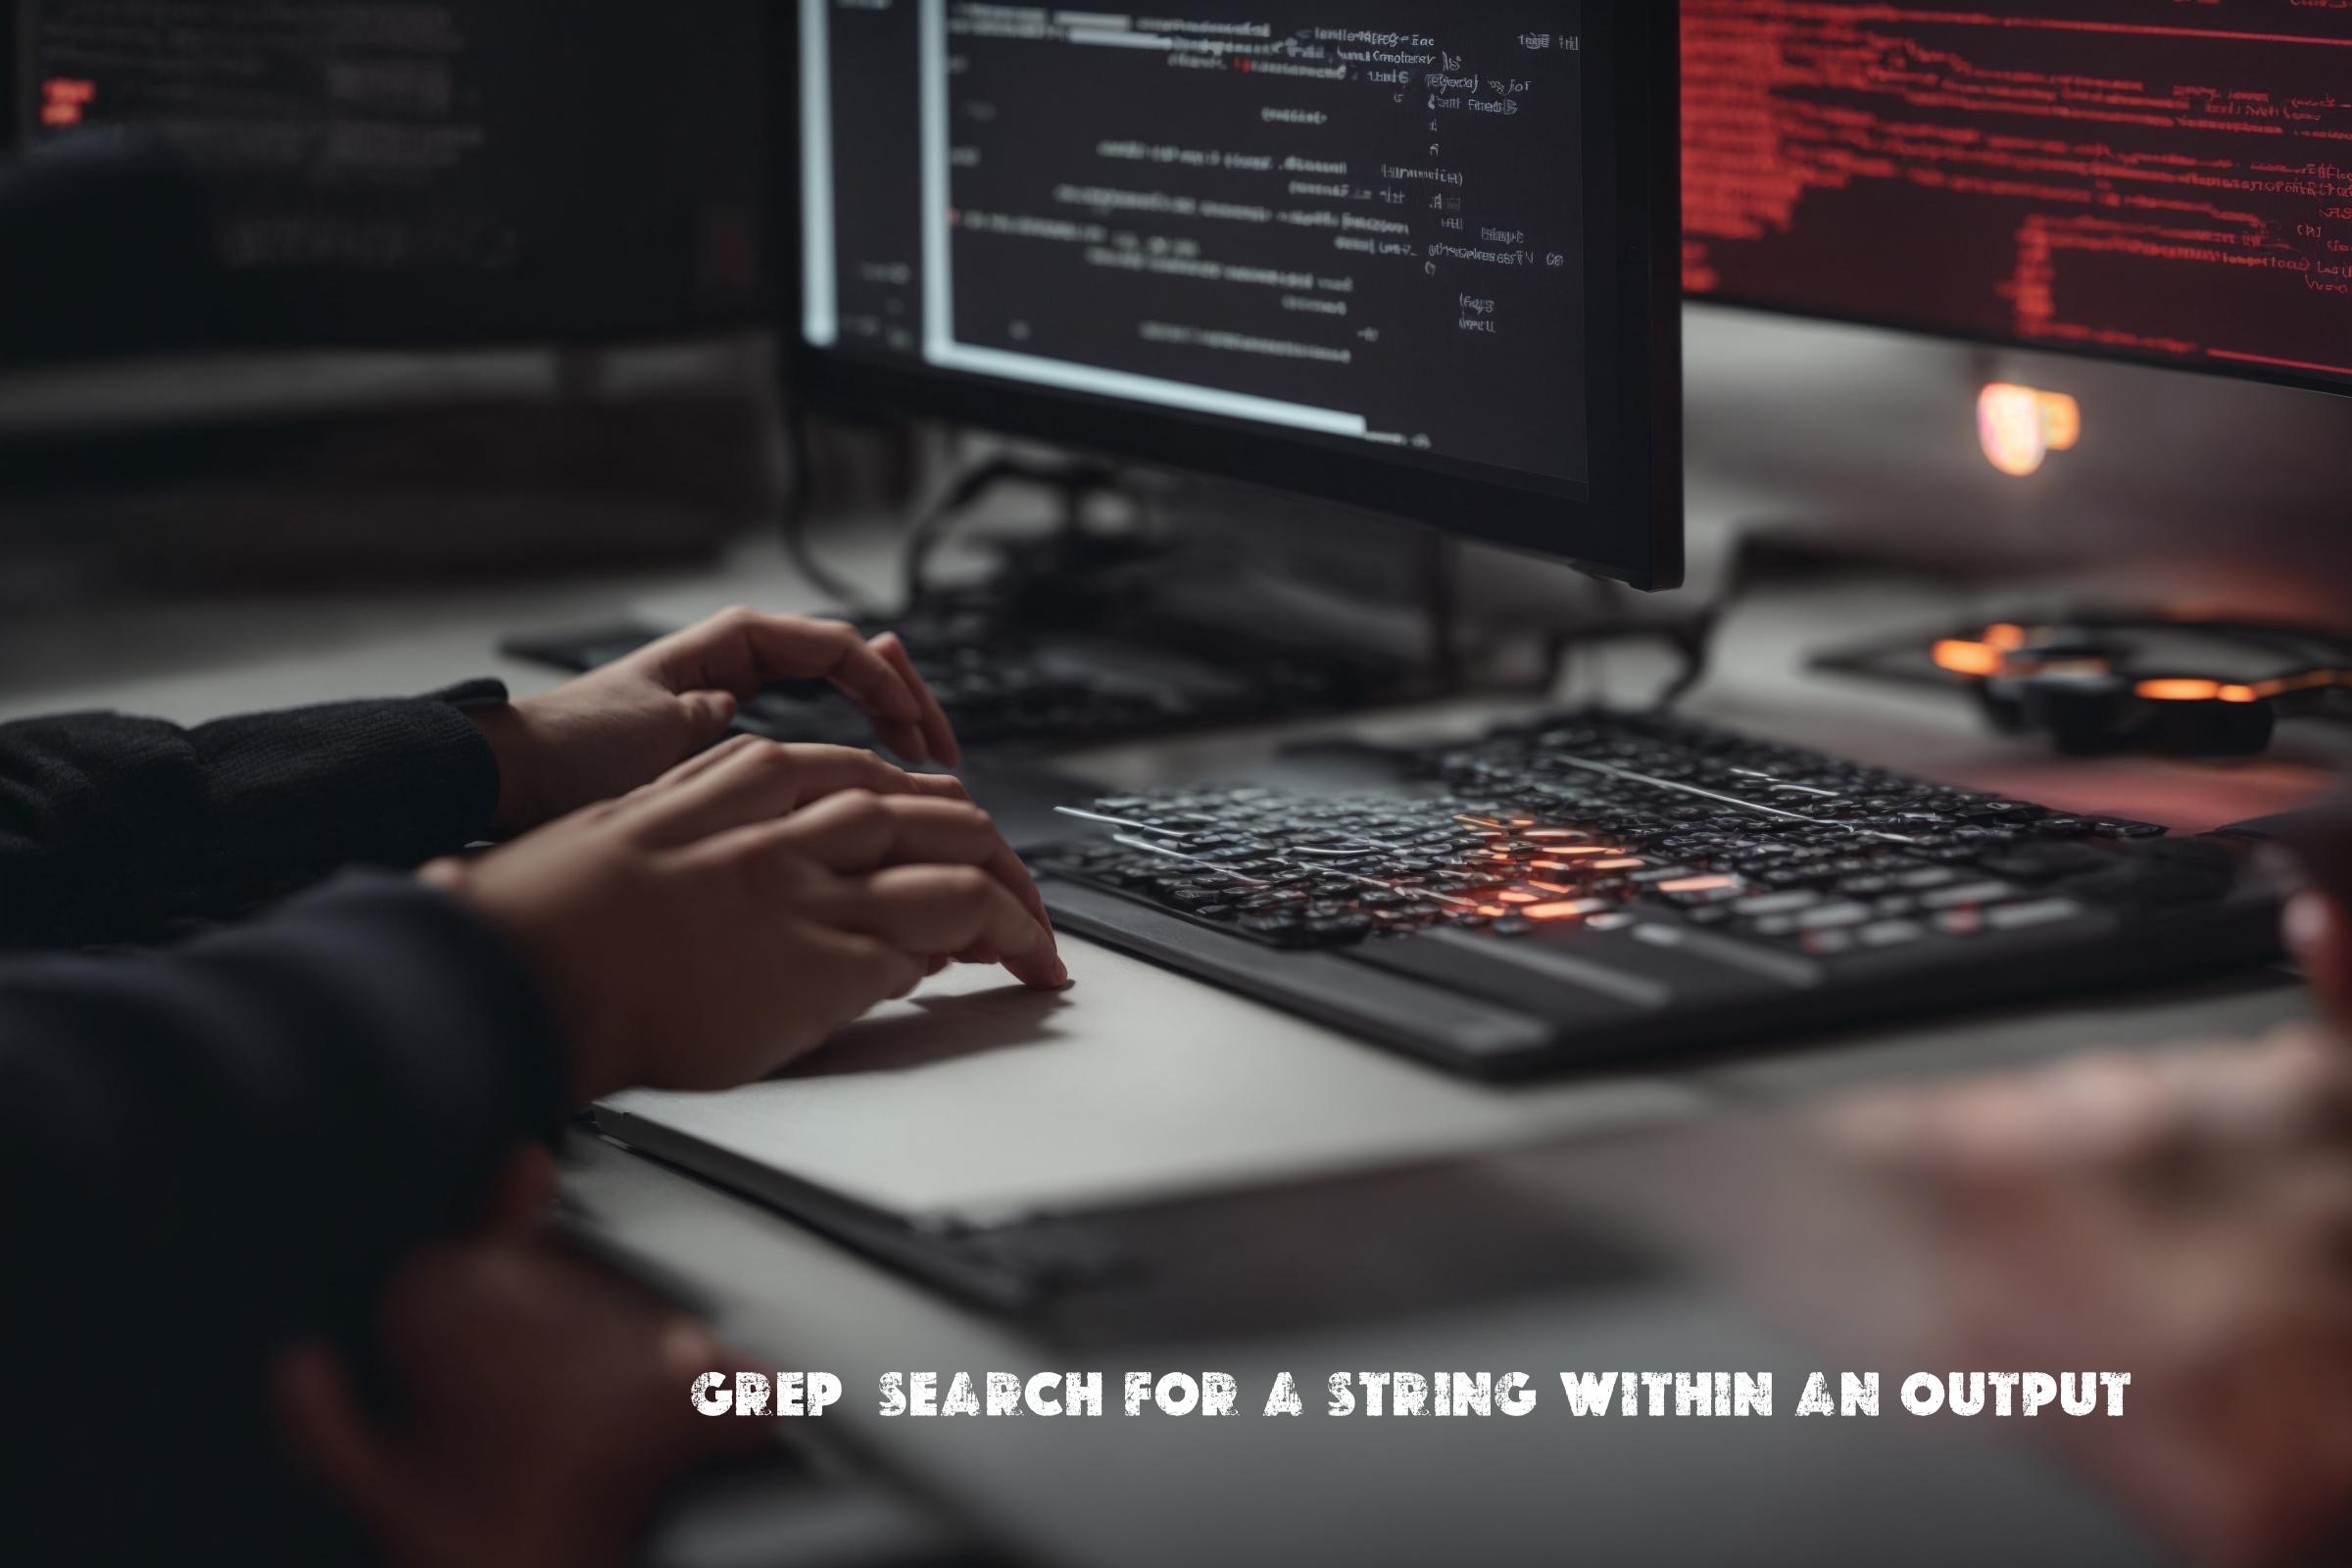 Introduction to grep (Search for a string within an output, count and extract)